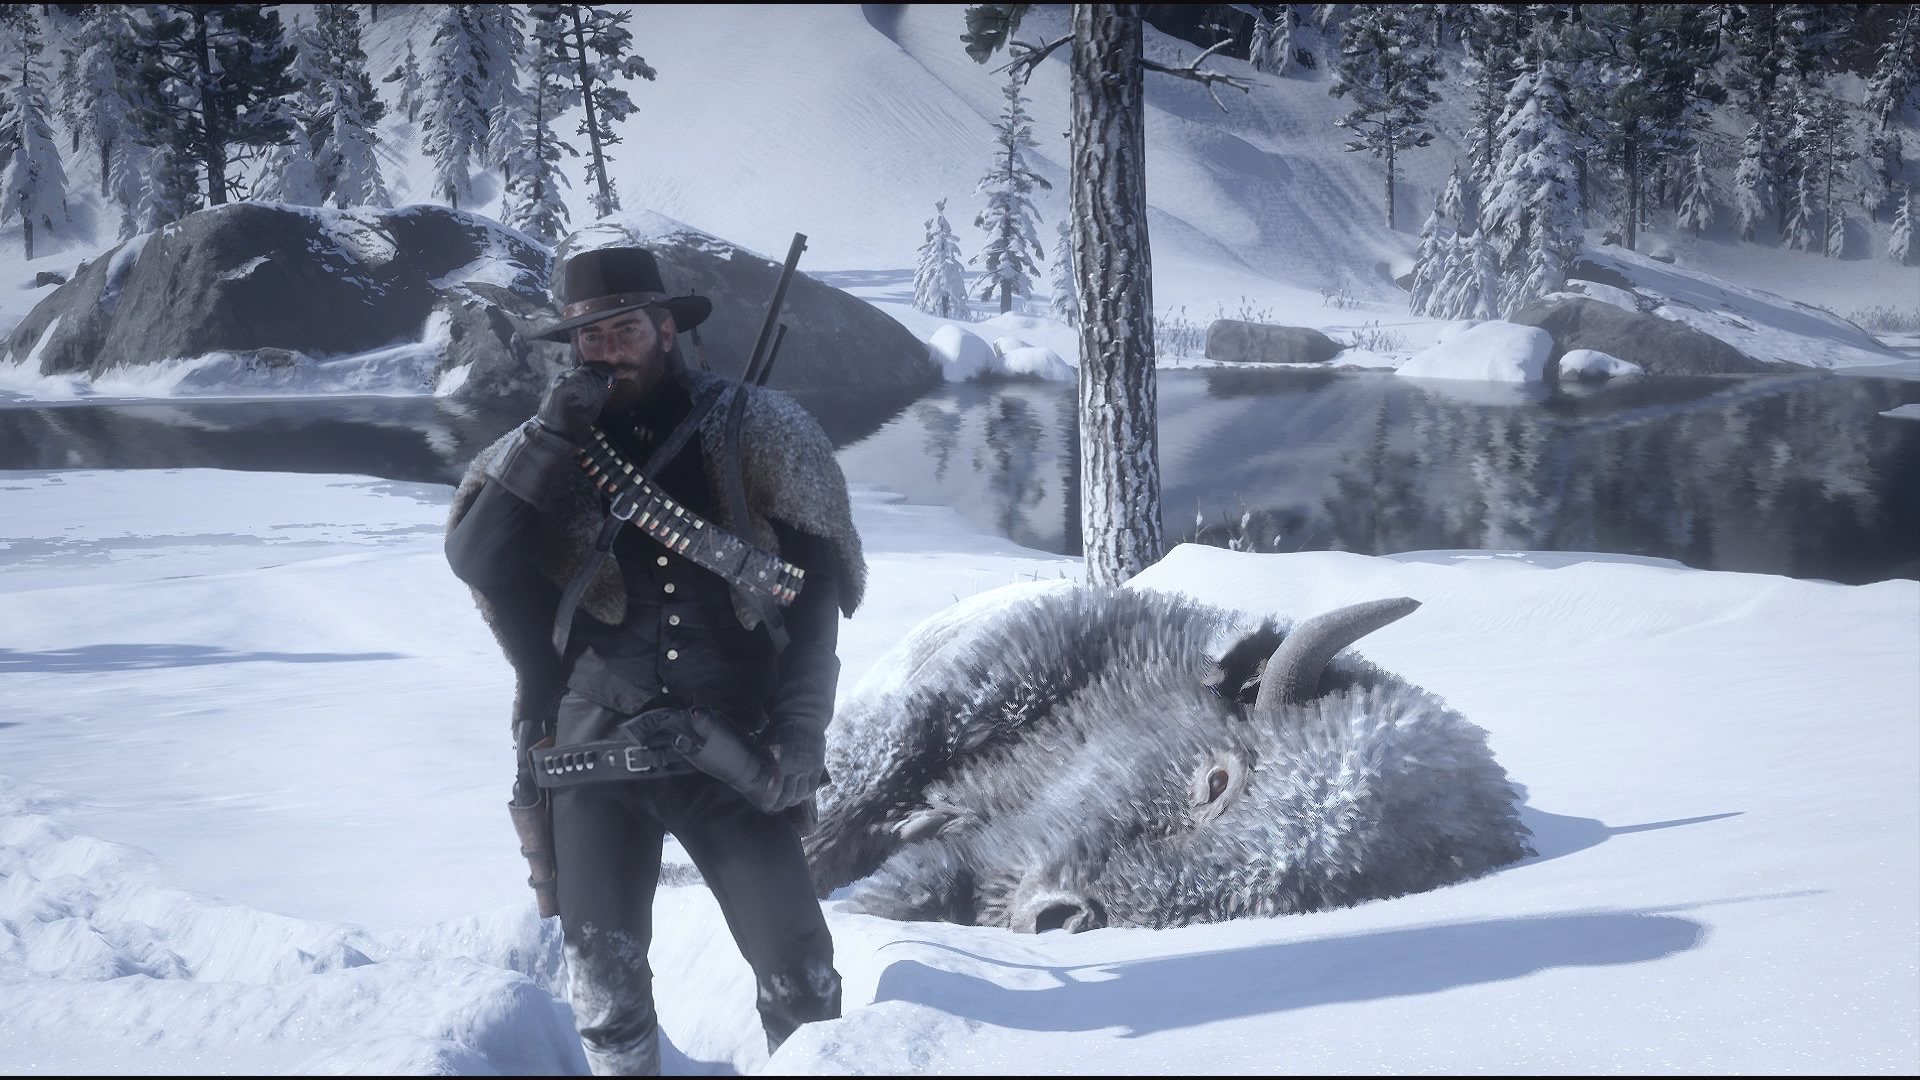 A hunter with a rifle on his back and a dead animal on the snowy ground.